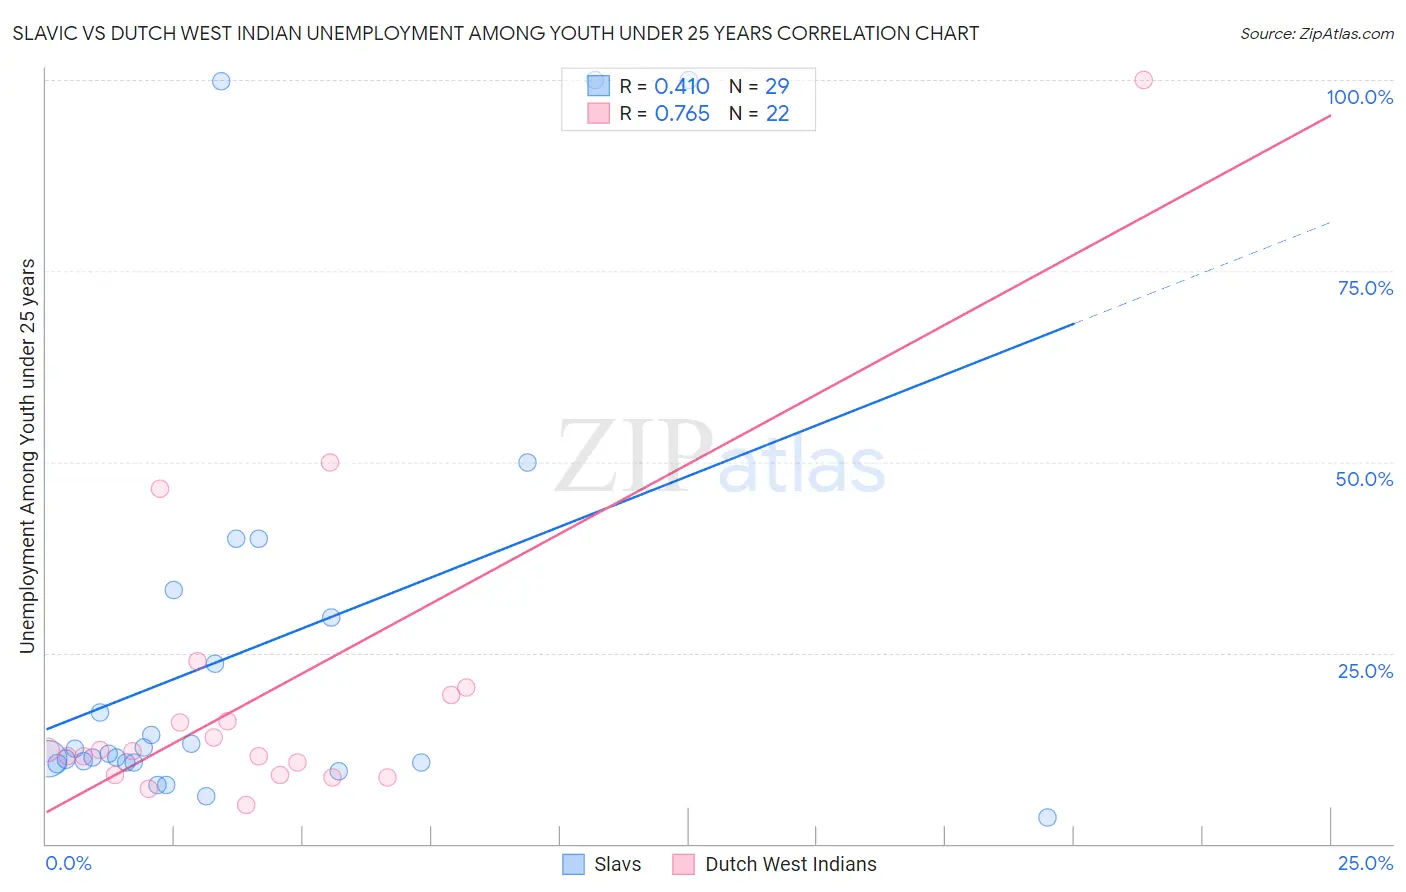 Slavic vs Dutch West Indian Unemployment Among Youth under 25 years